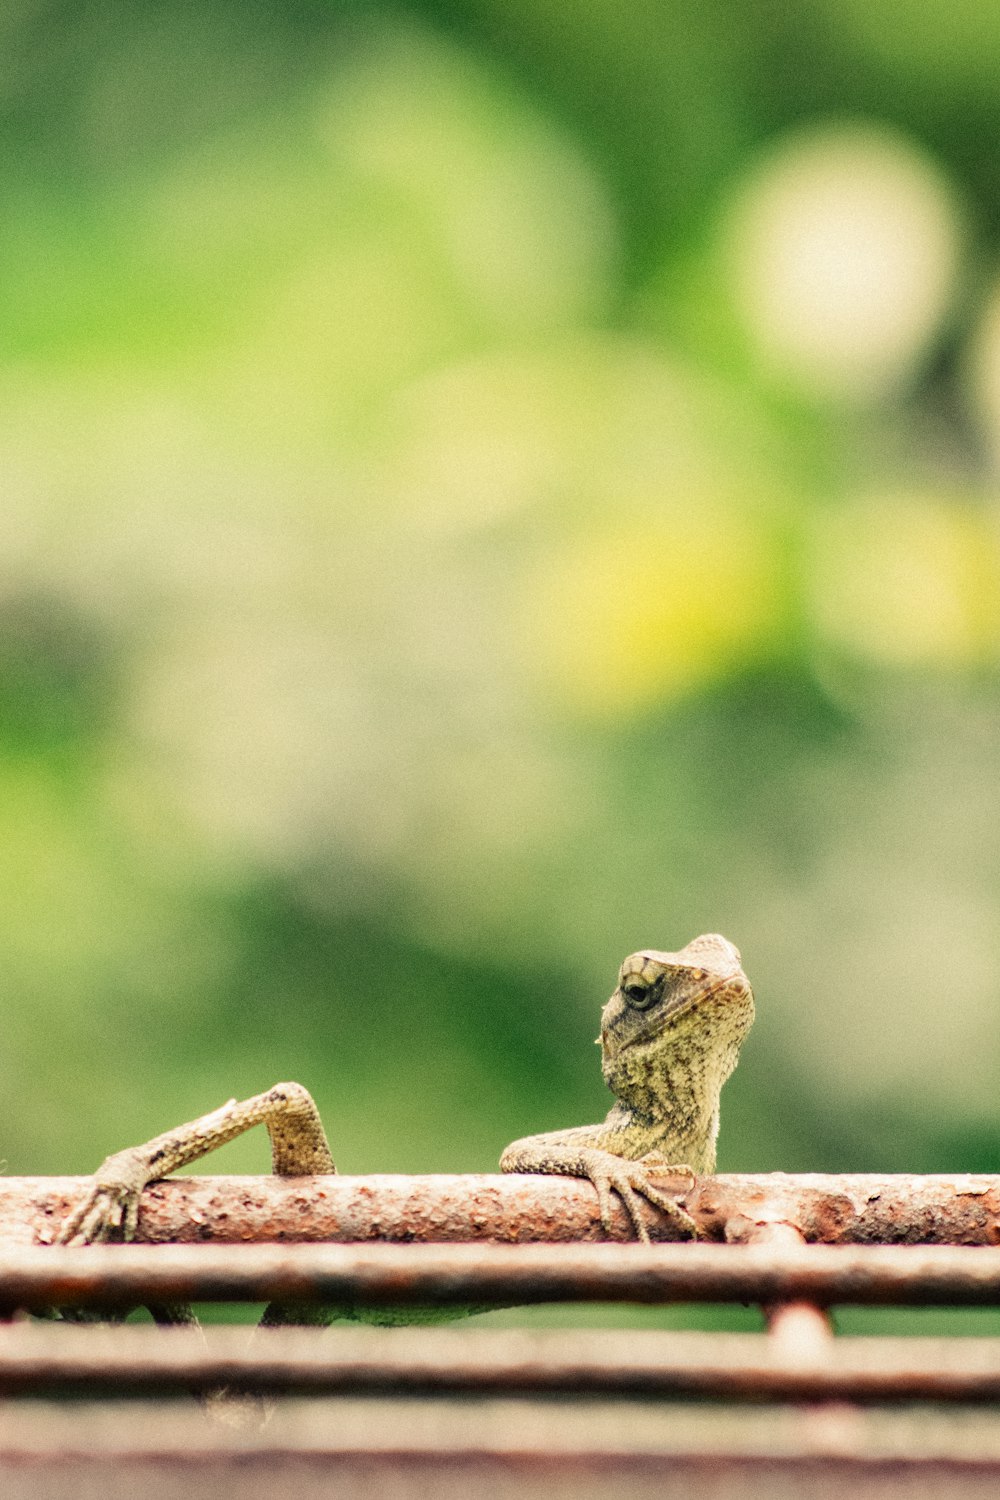 a small lizard sitting on top of a wooden table